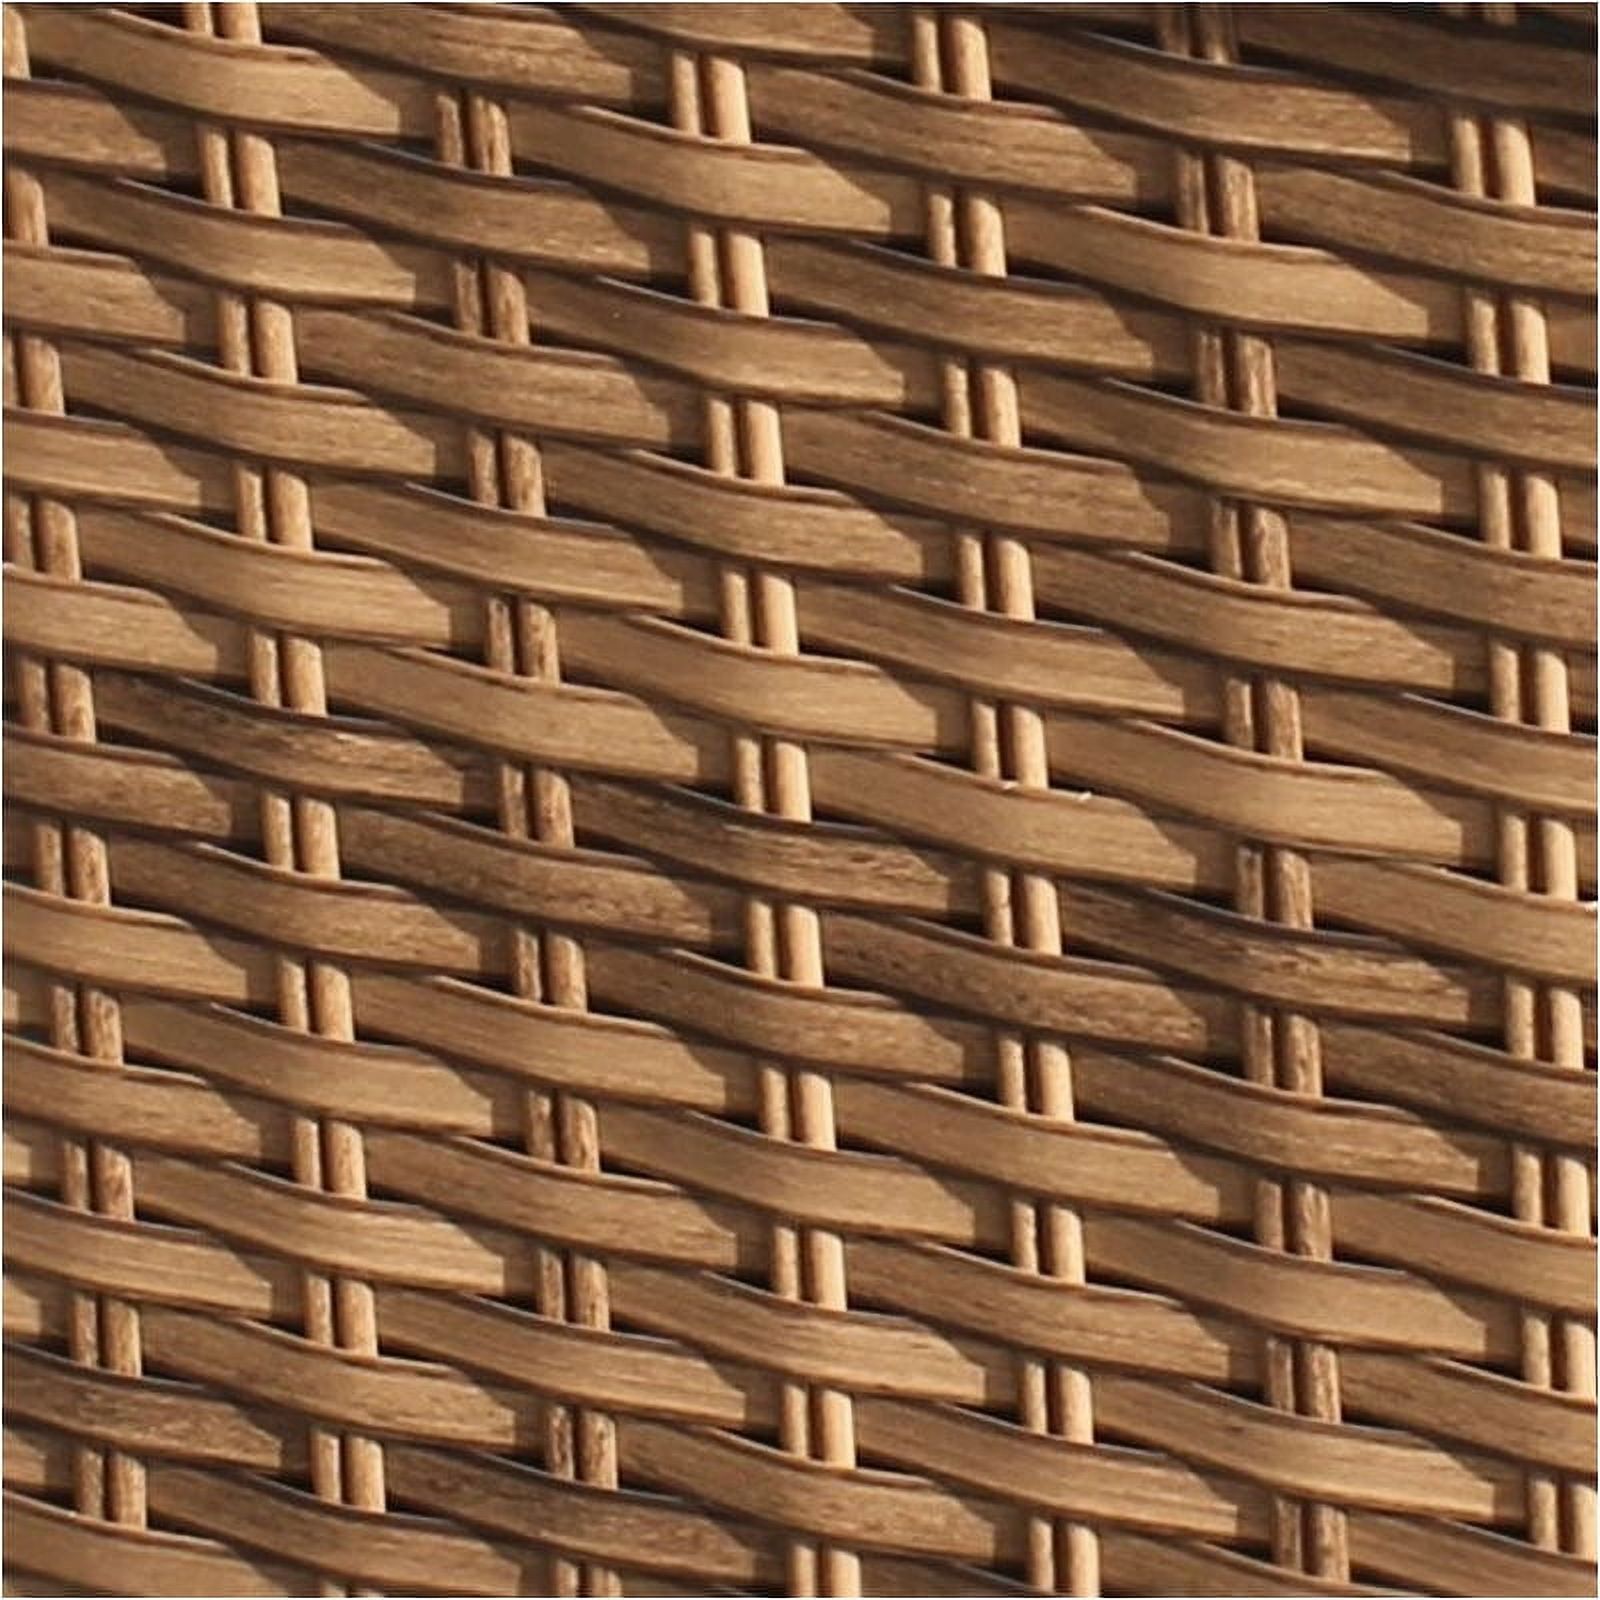 Bowery Hill Transitional Wicker / Rattan Outdoor Side Table in Caramel - image 3 of 3